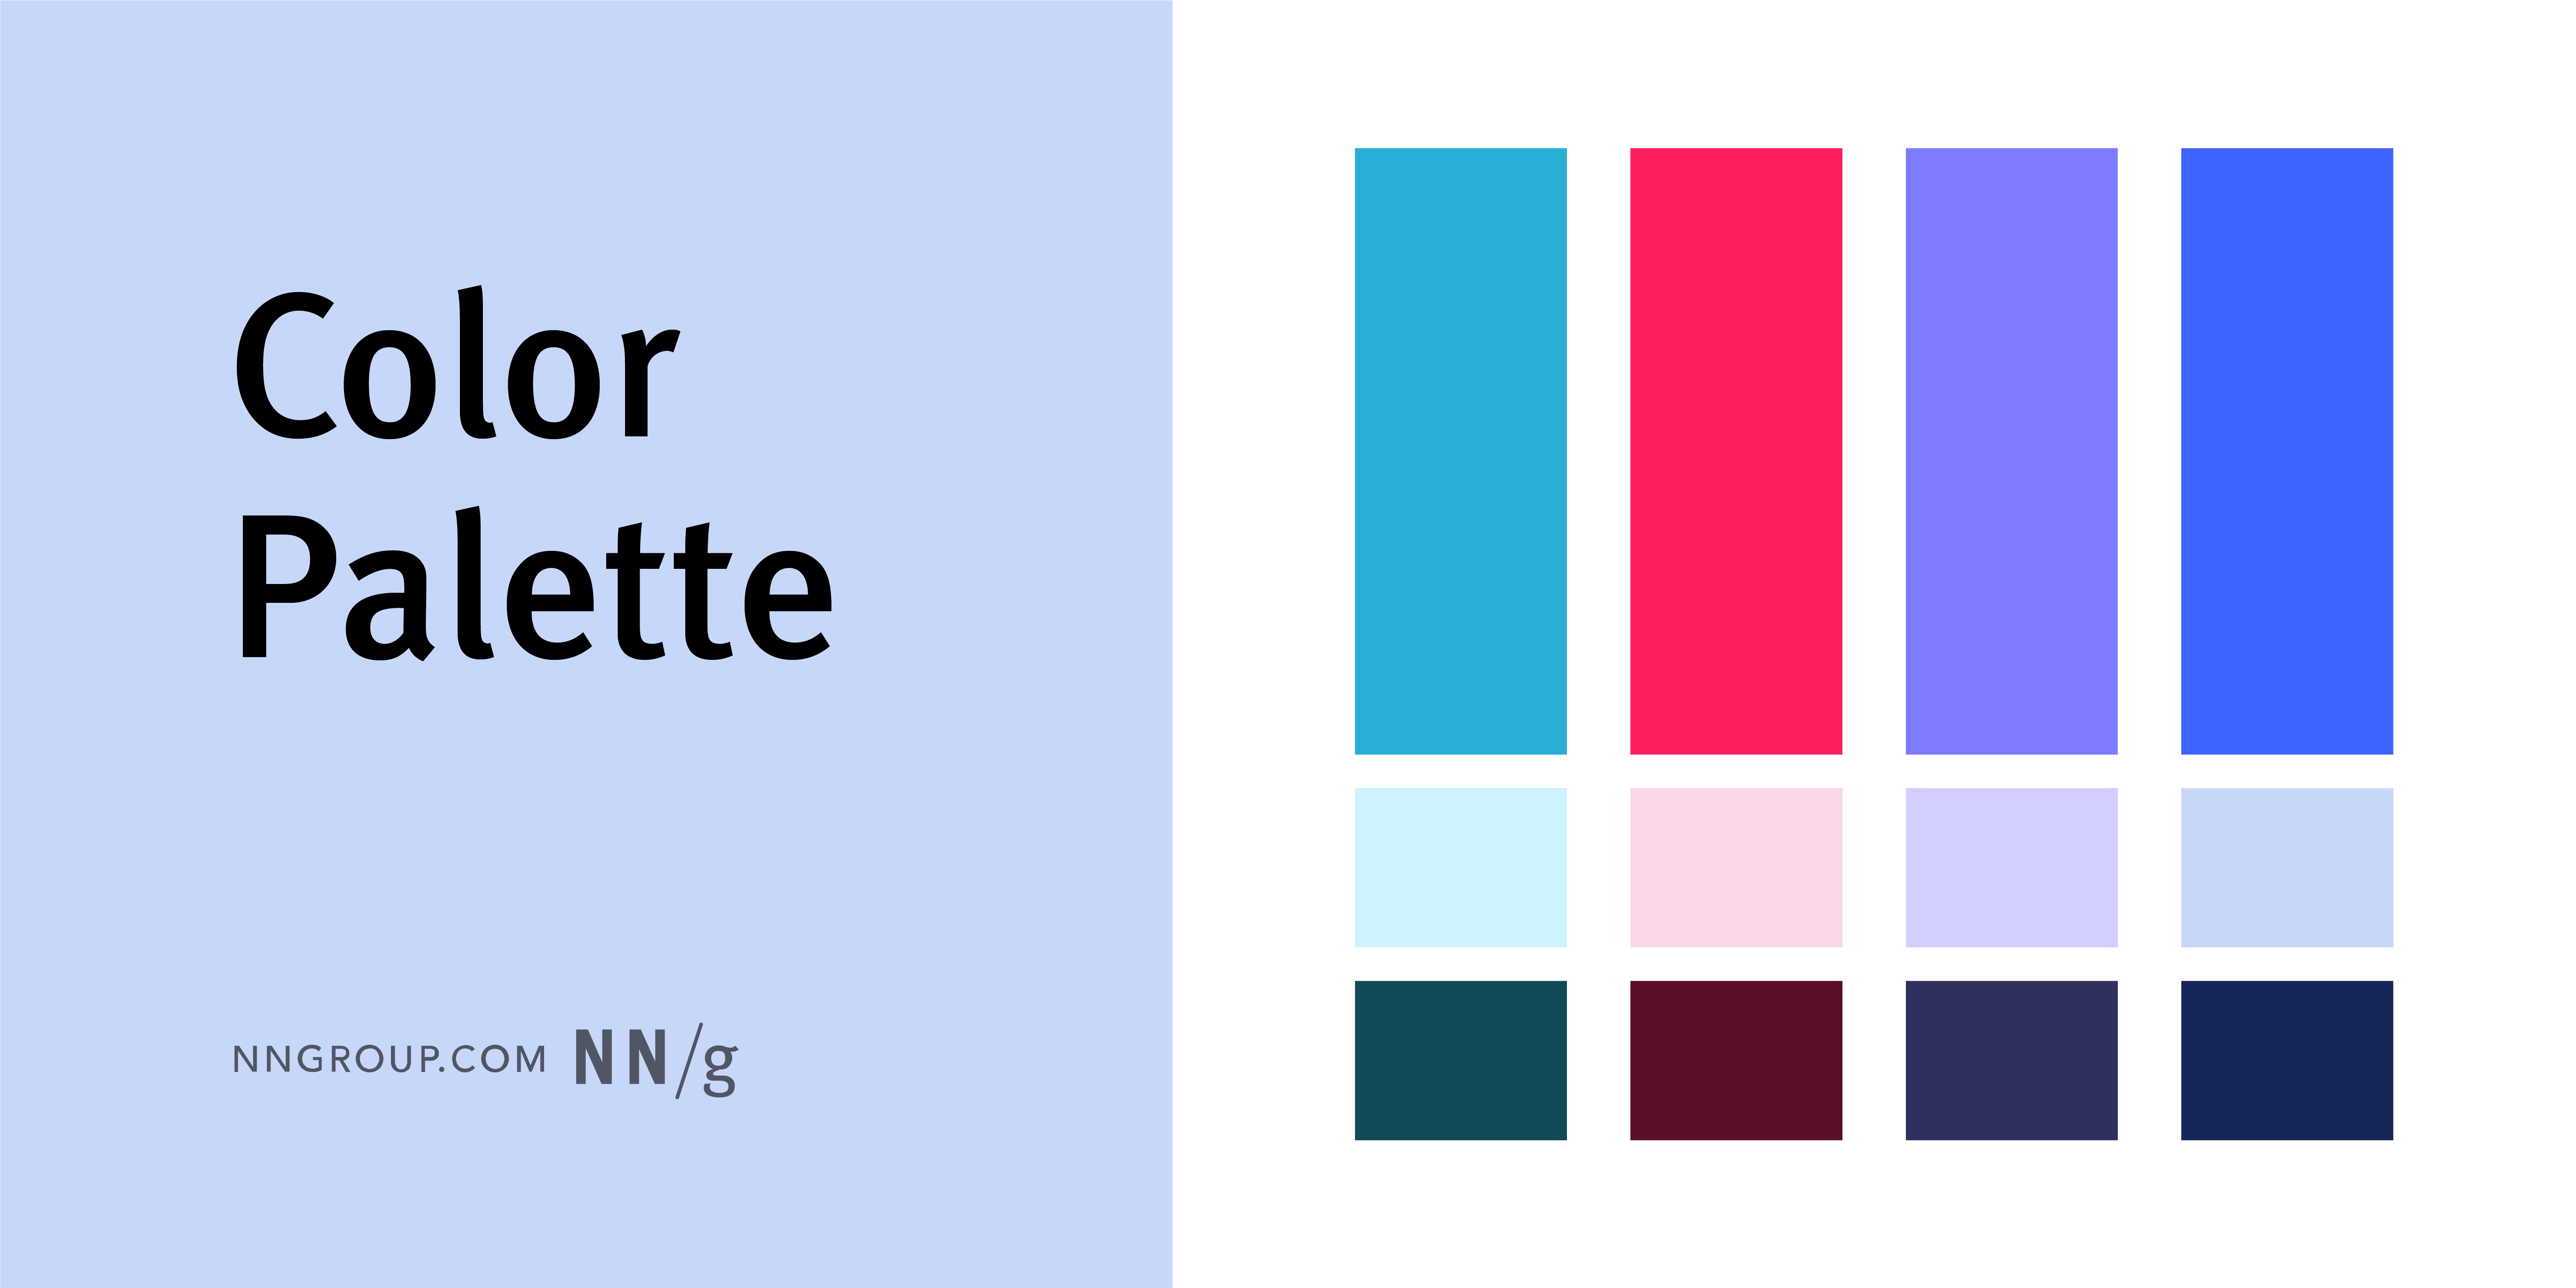 A color palette with three rows of color squares. The colors range from teal to dark blue, vibrant red, and muted purples and pinks.